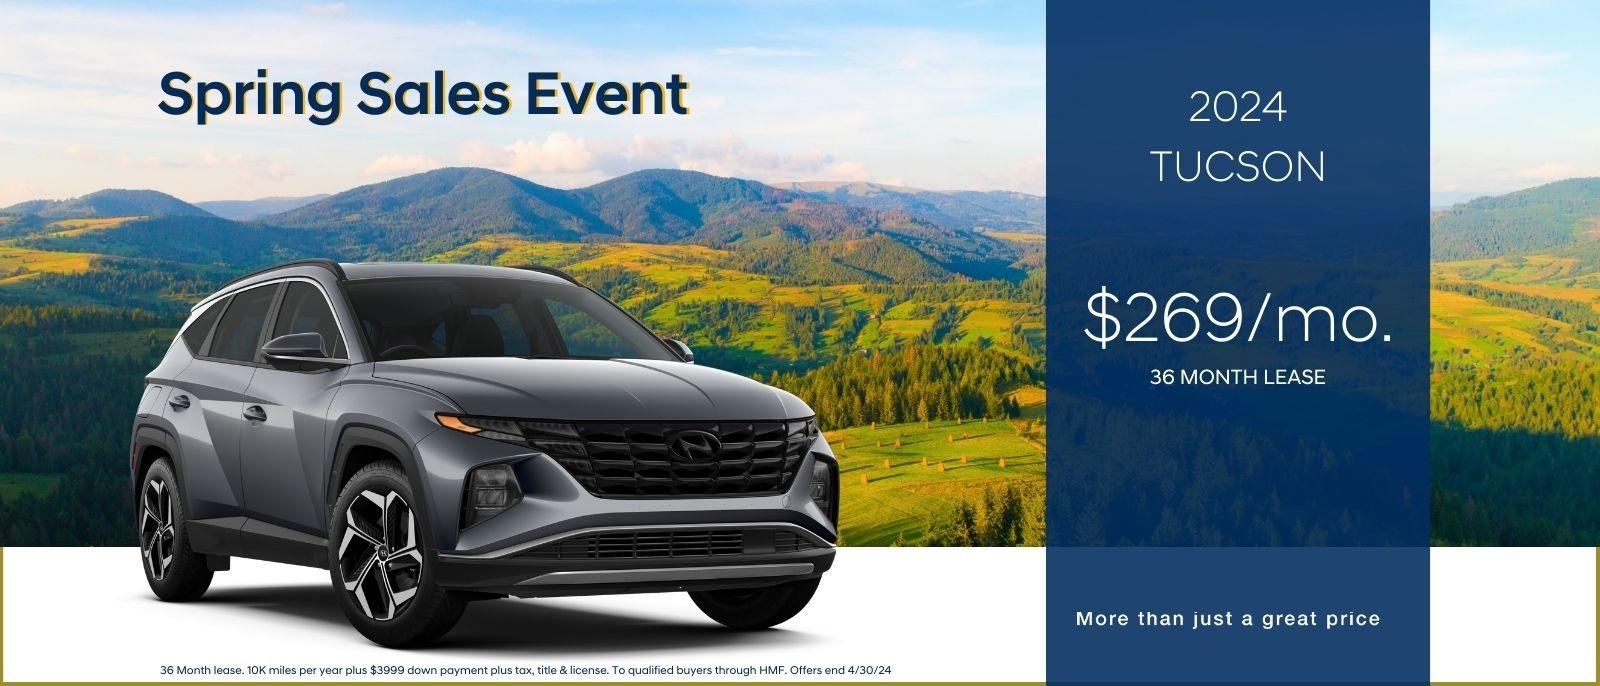 Spring Sales Event 

2024 Tucson
$269/mo. 36 month lease

More than just a great price